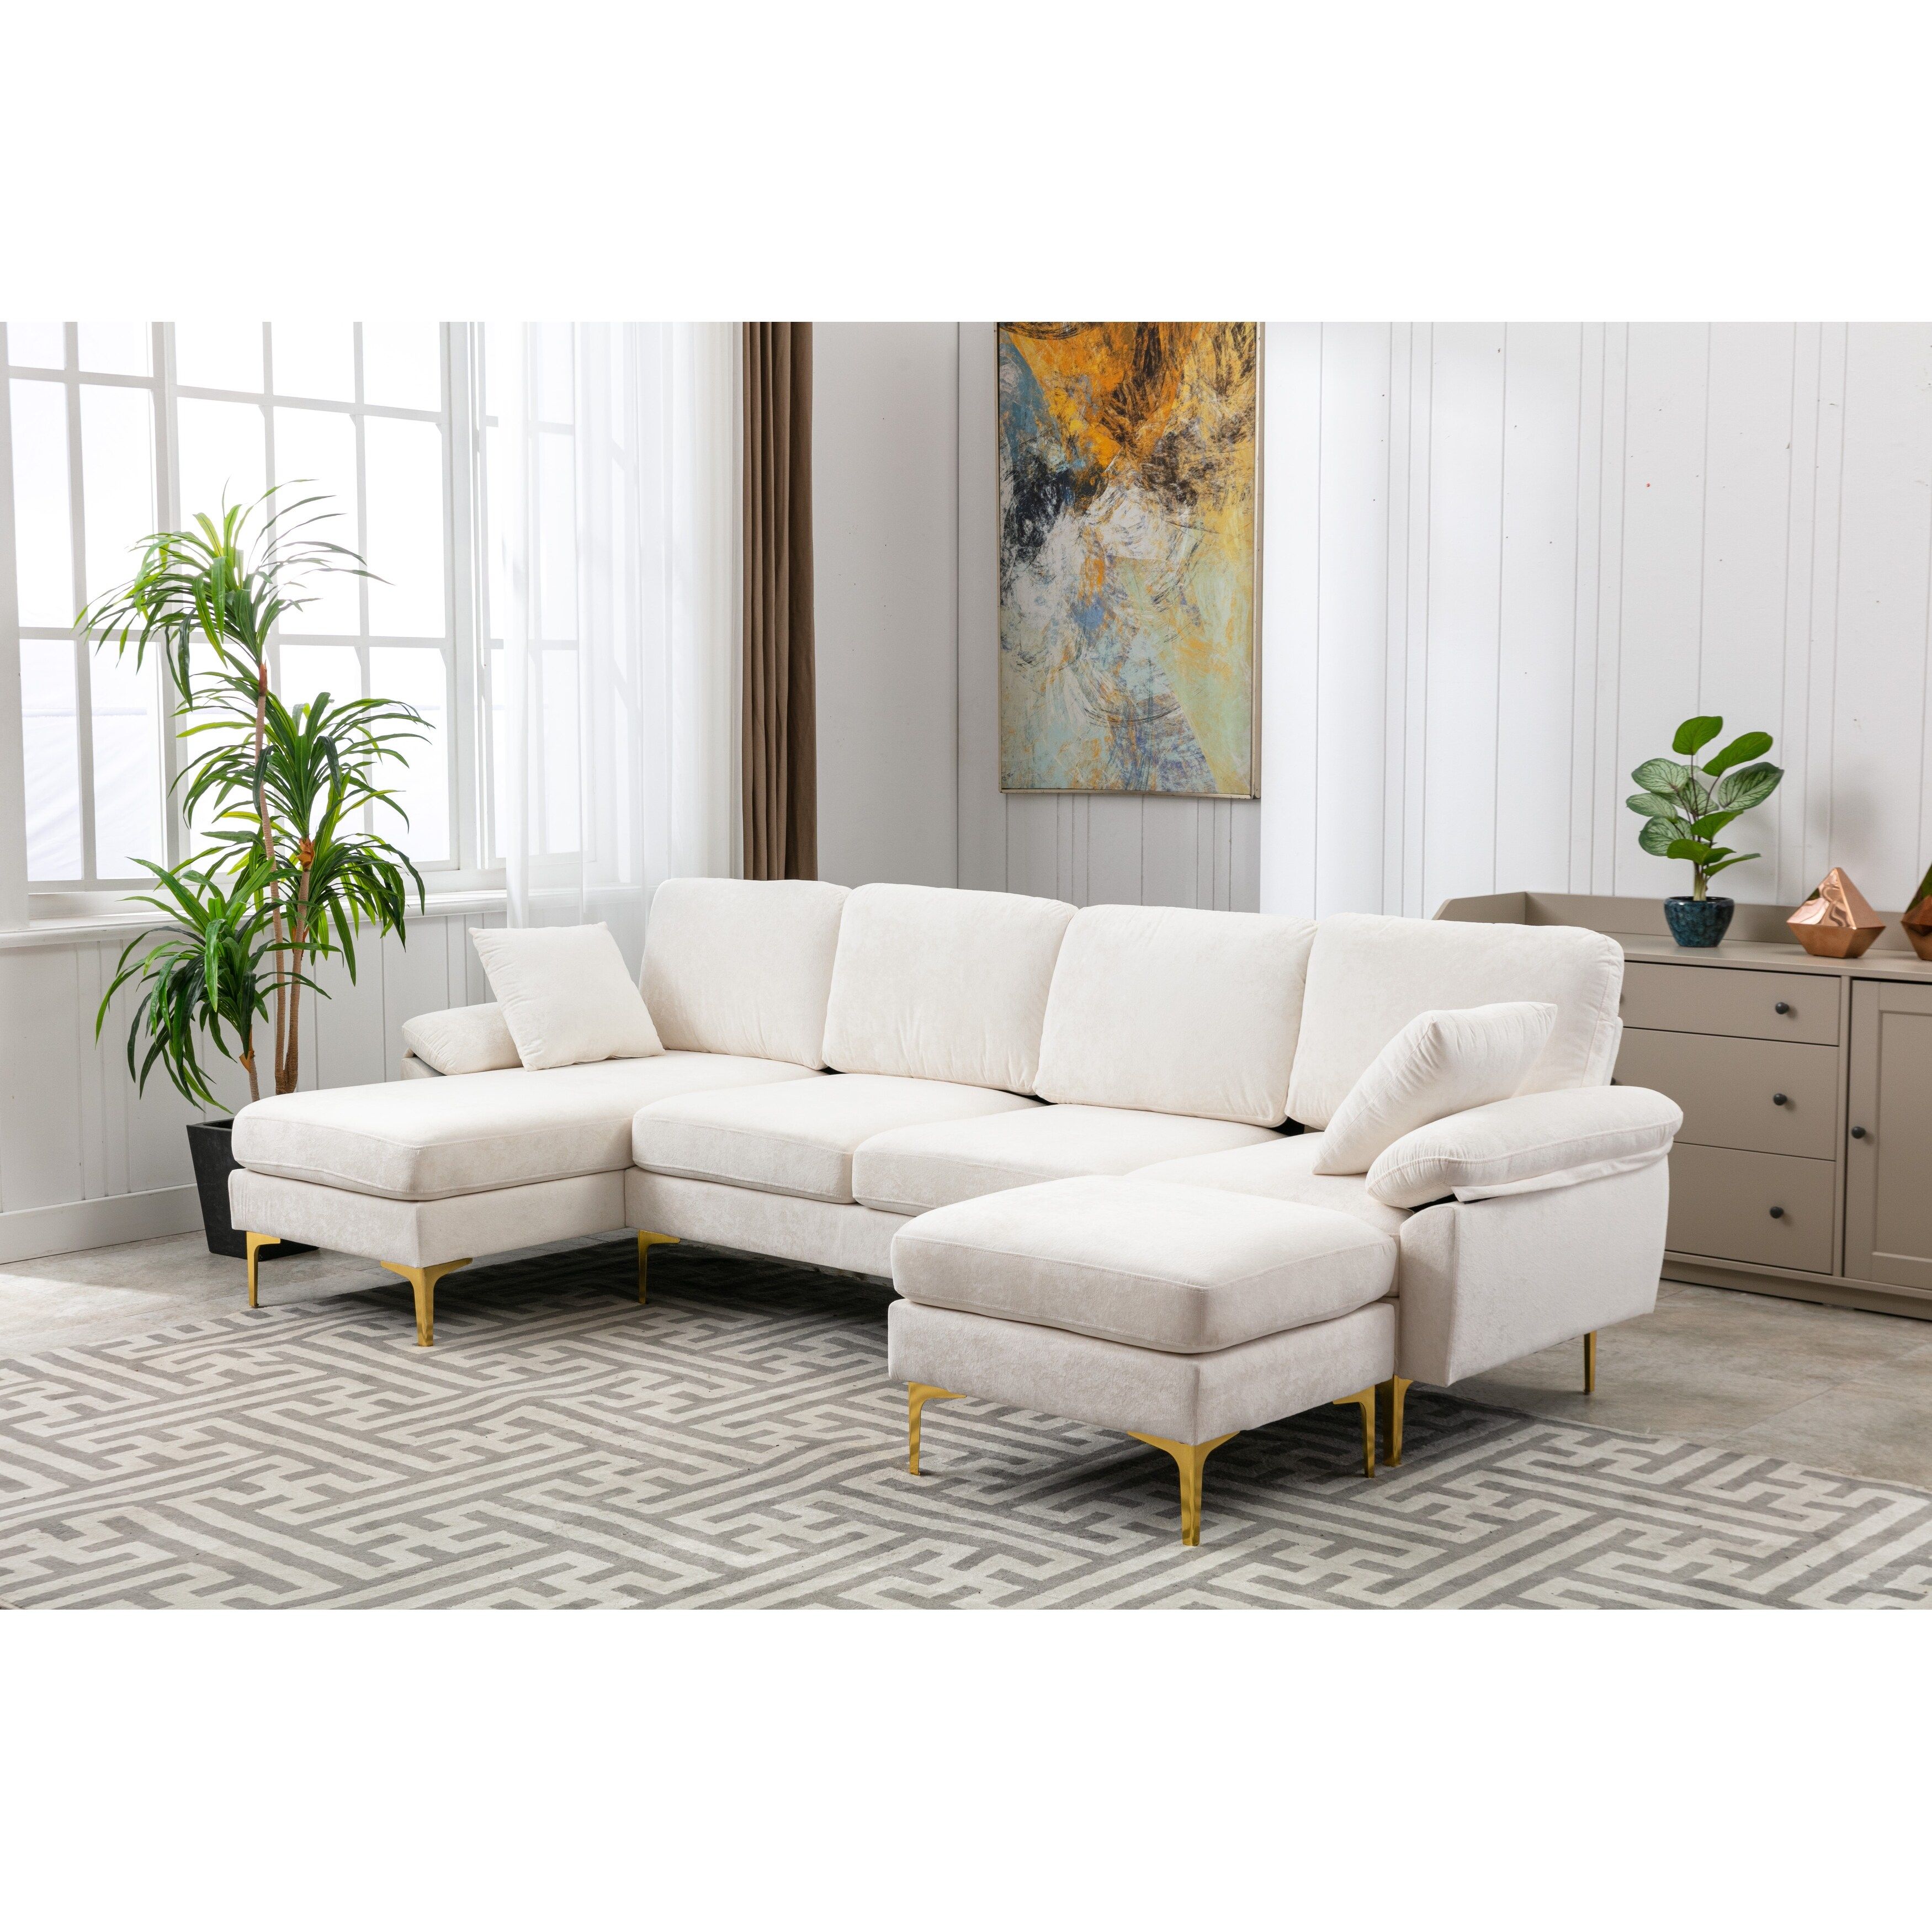 Living Room Sectional Sofa, L Shaped Upholstered Couch With Movable Ottoman,  Convertible Modular Sofa With Gold Metal Legs – On Sale – – 37311561 Within Sectional Sofas With Movable Ottoman (View 10 of 15)